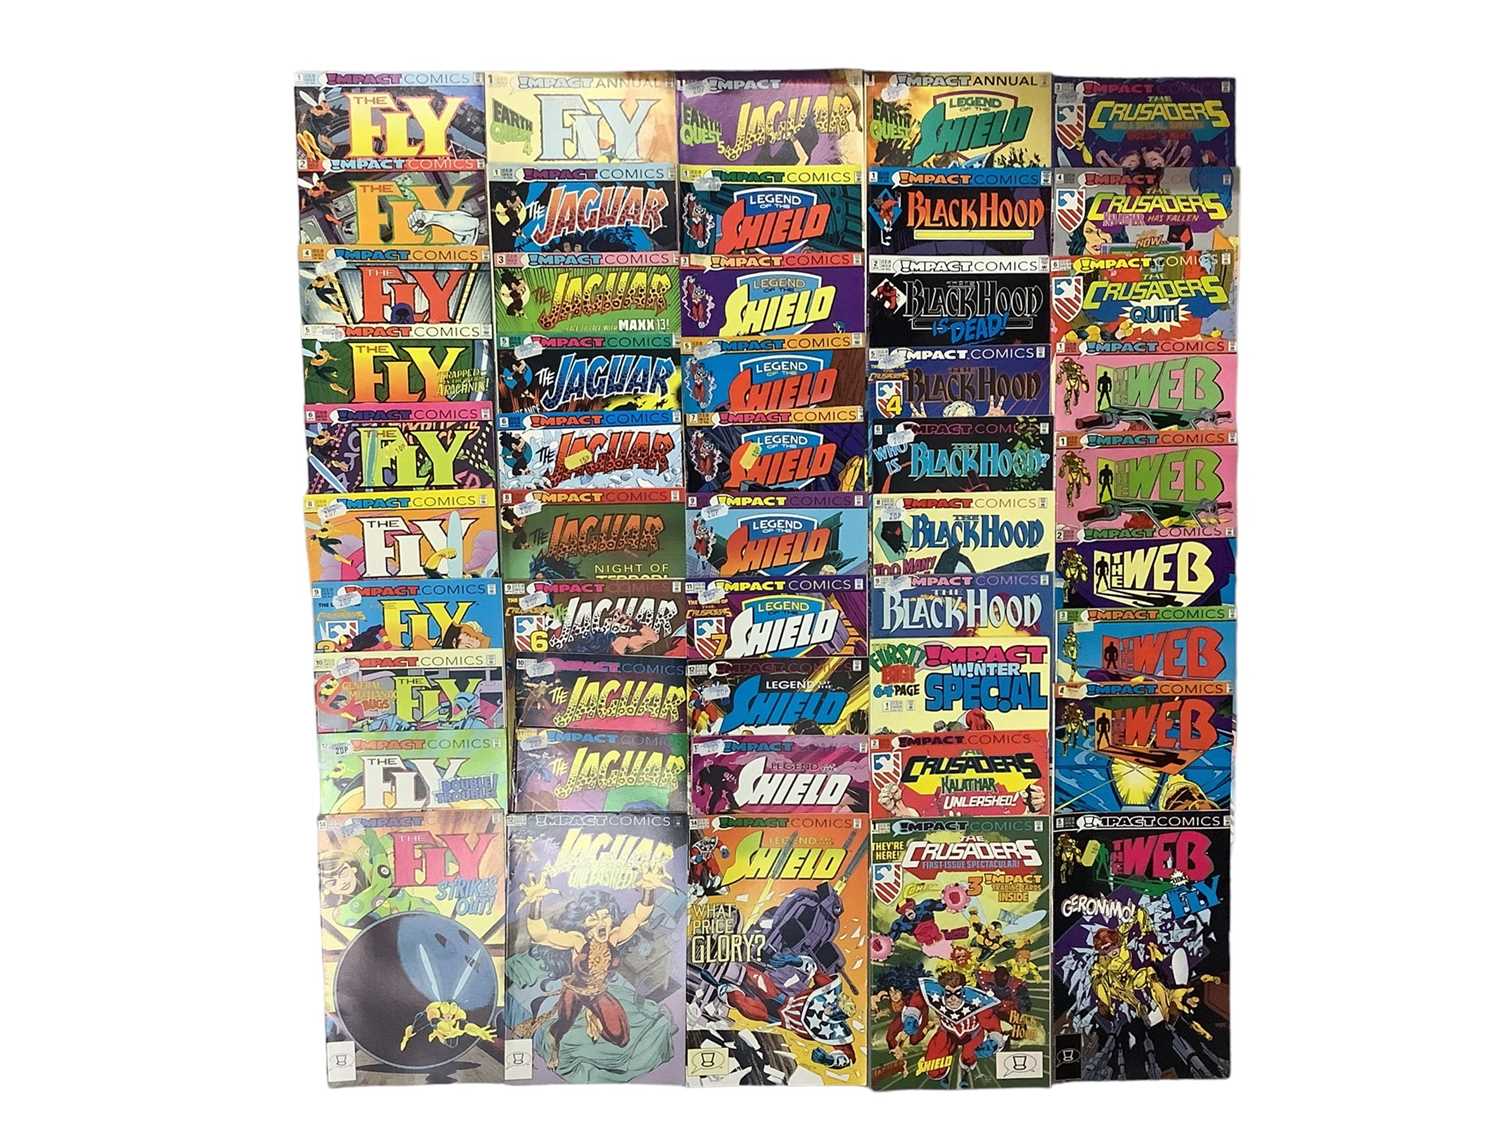 Lot 179 - Group of Impact comics 1990's. To include the Web, the Comet, BlackHood, the Fly, the Jaguar, Legend of the Shield and the Crusaders. Approximately 65 comics.